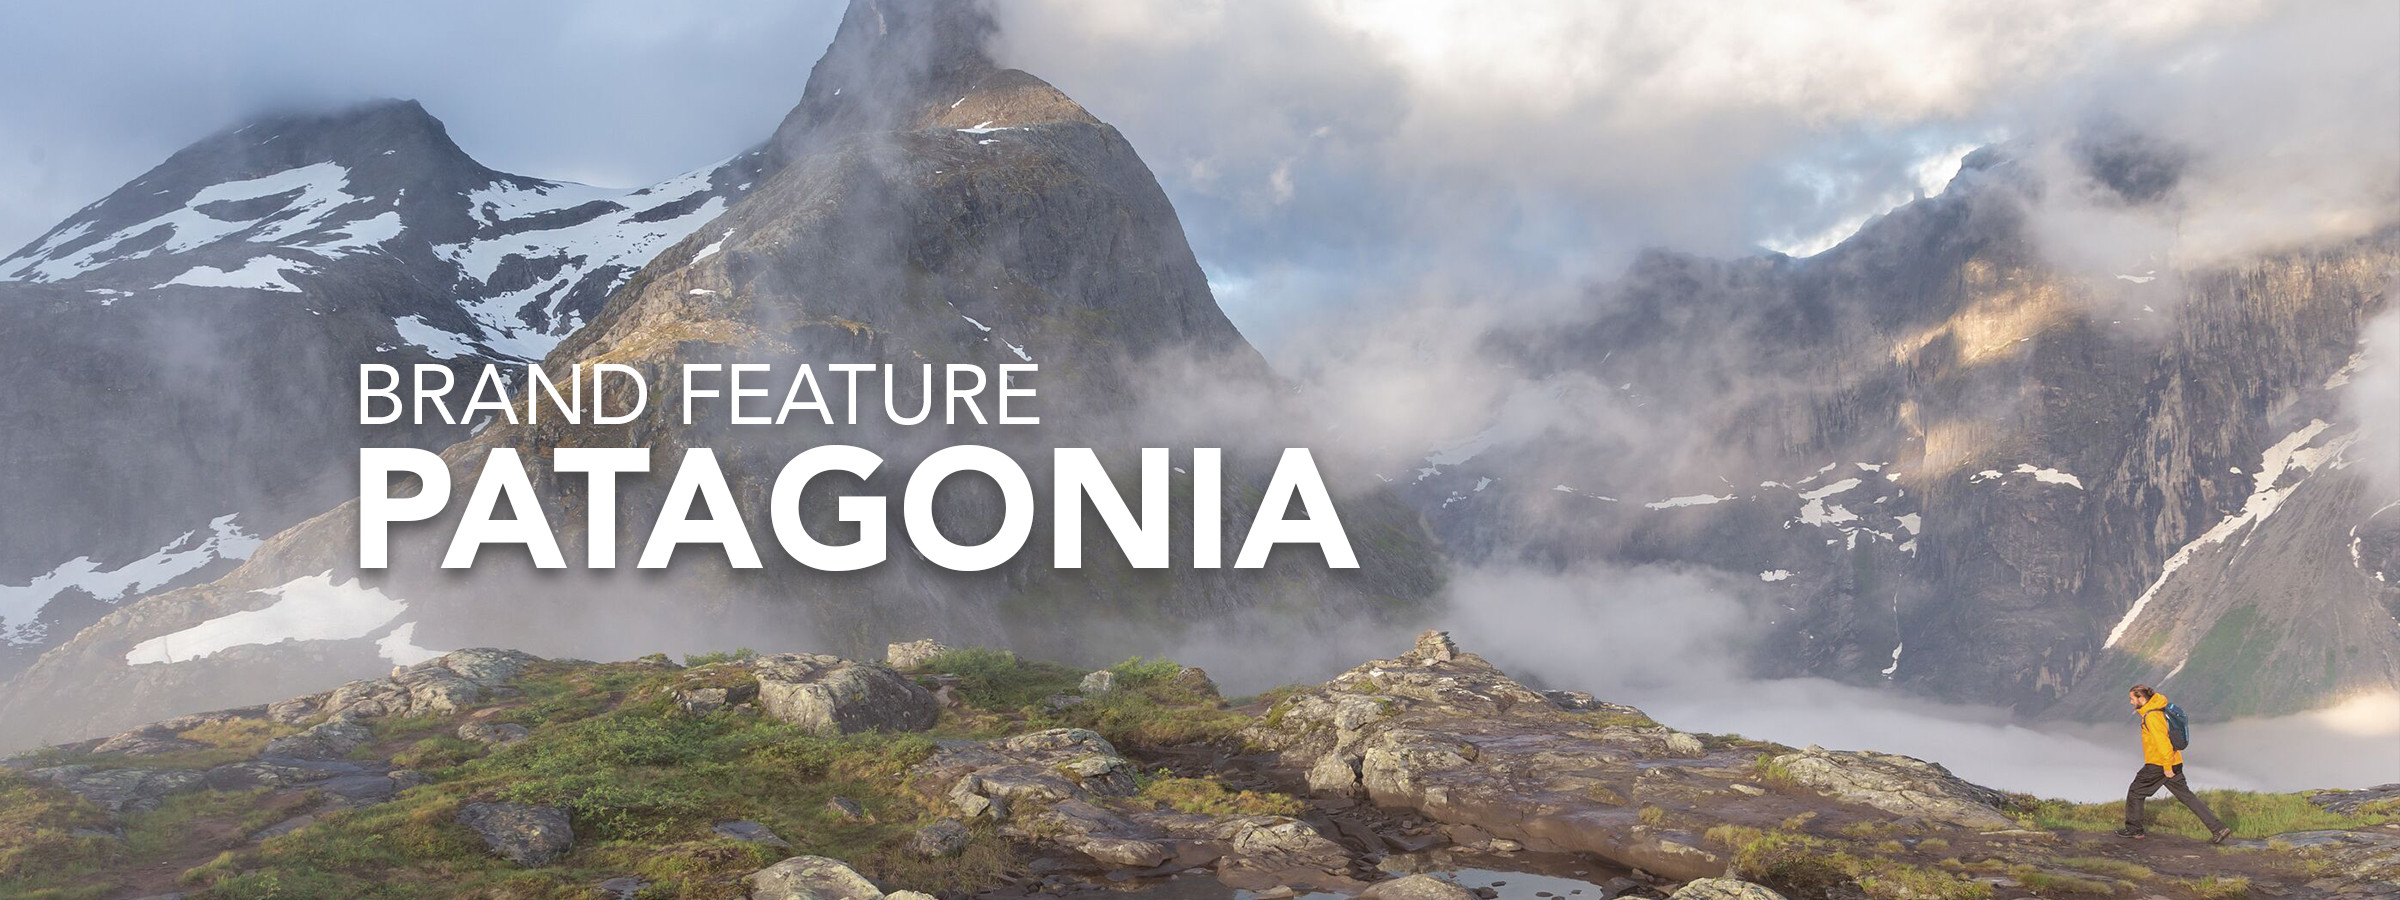 Brand Feature: Patagonia - “We're in business to save our home